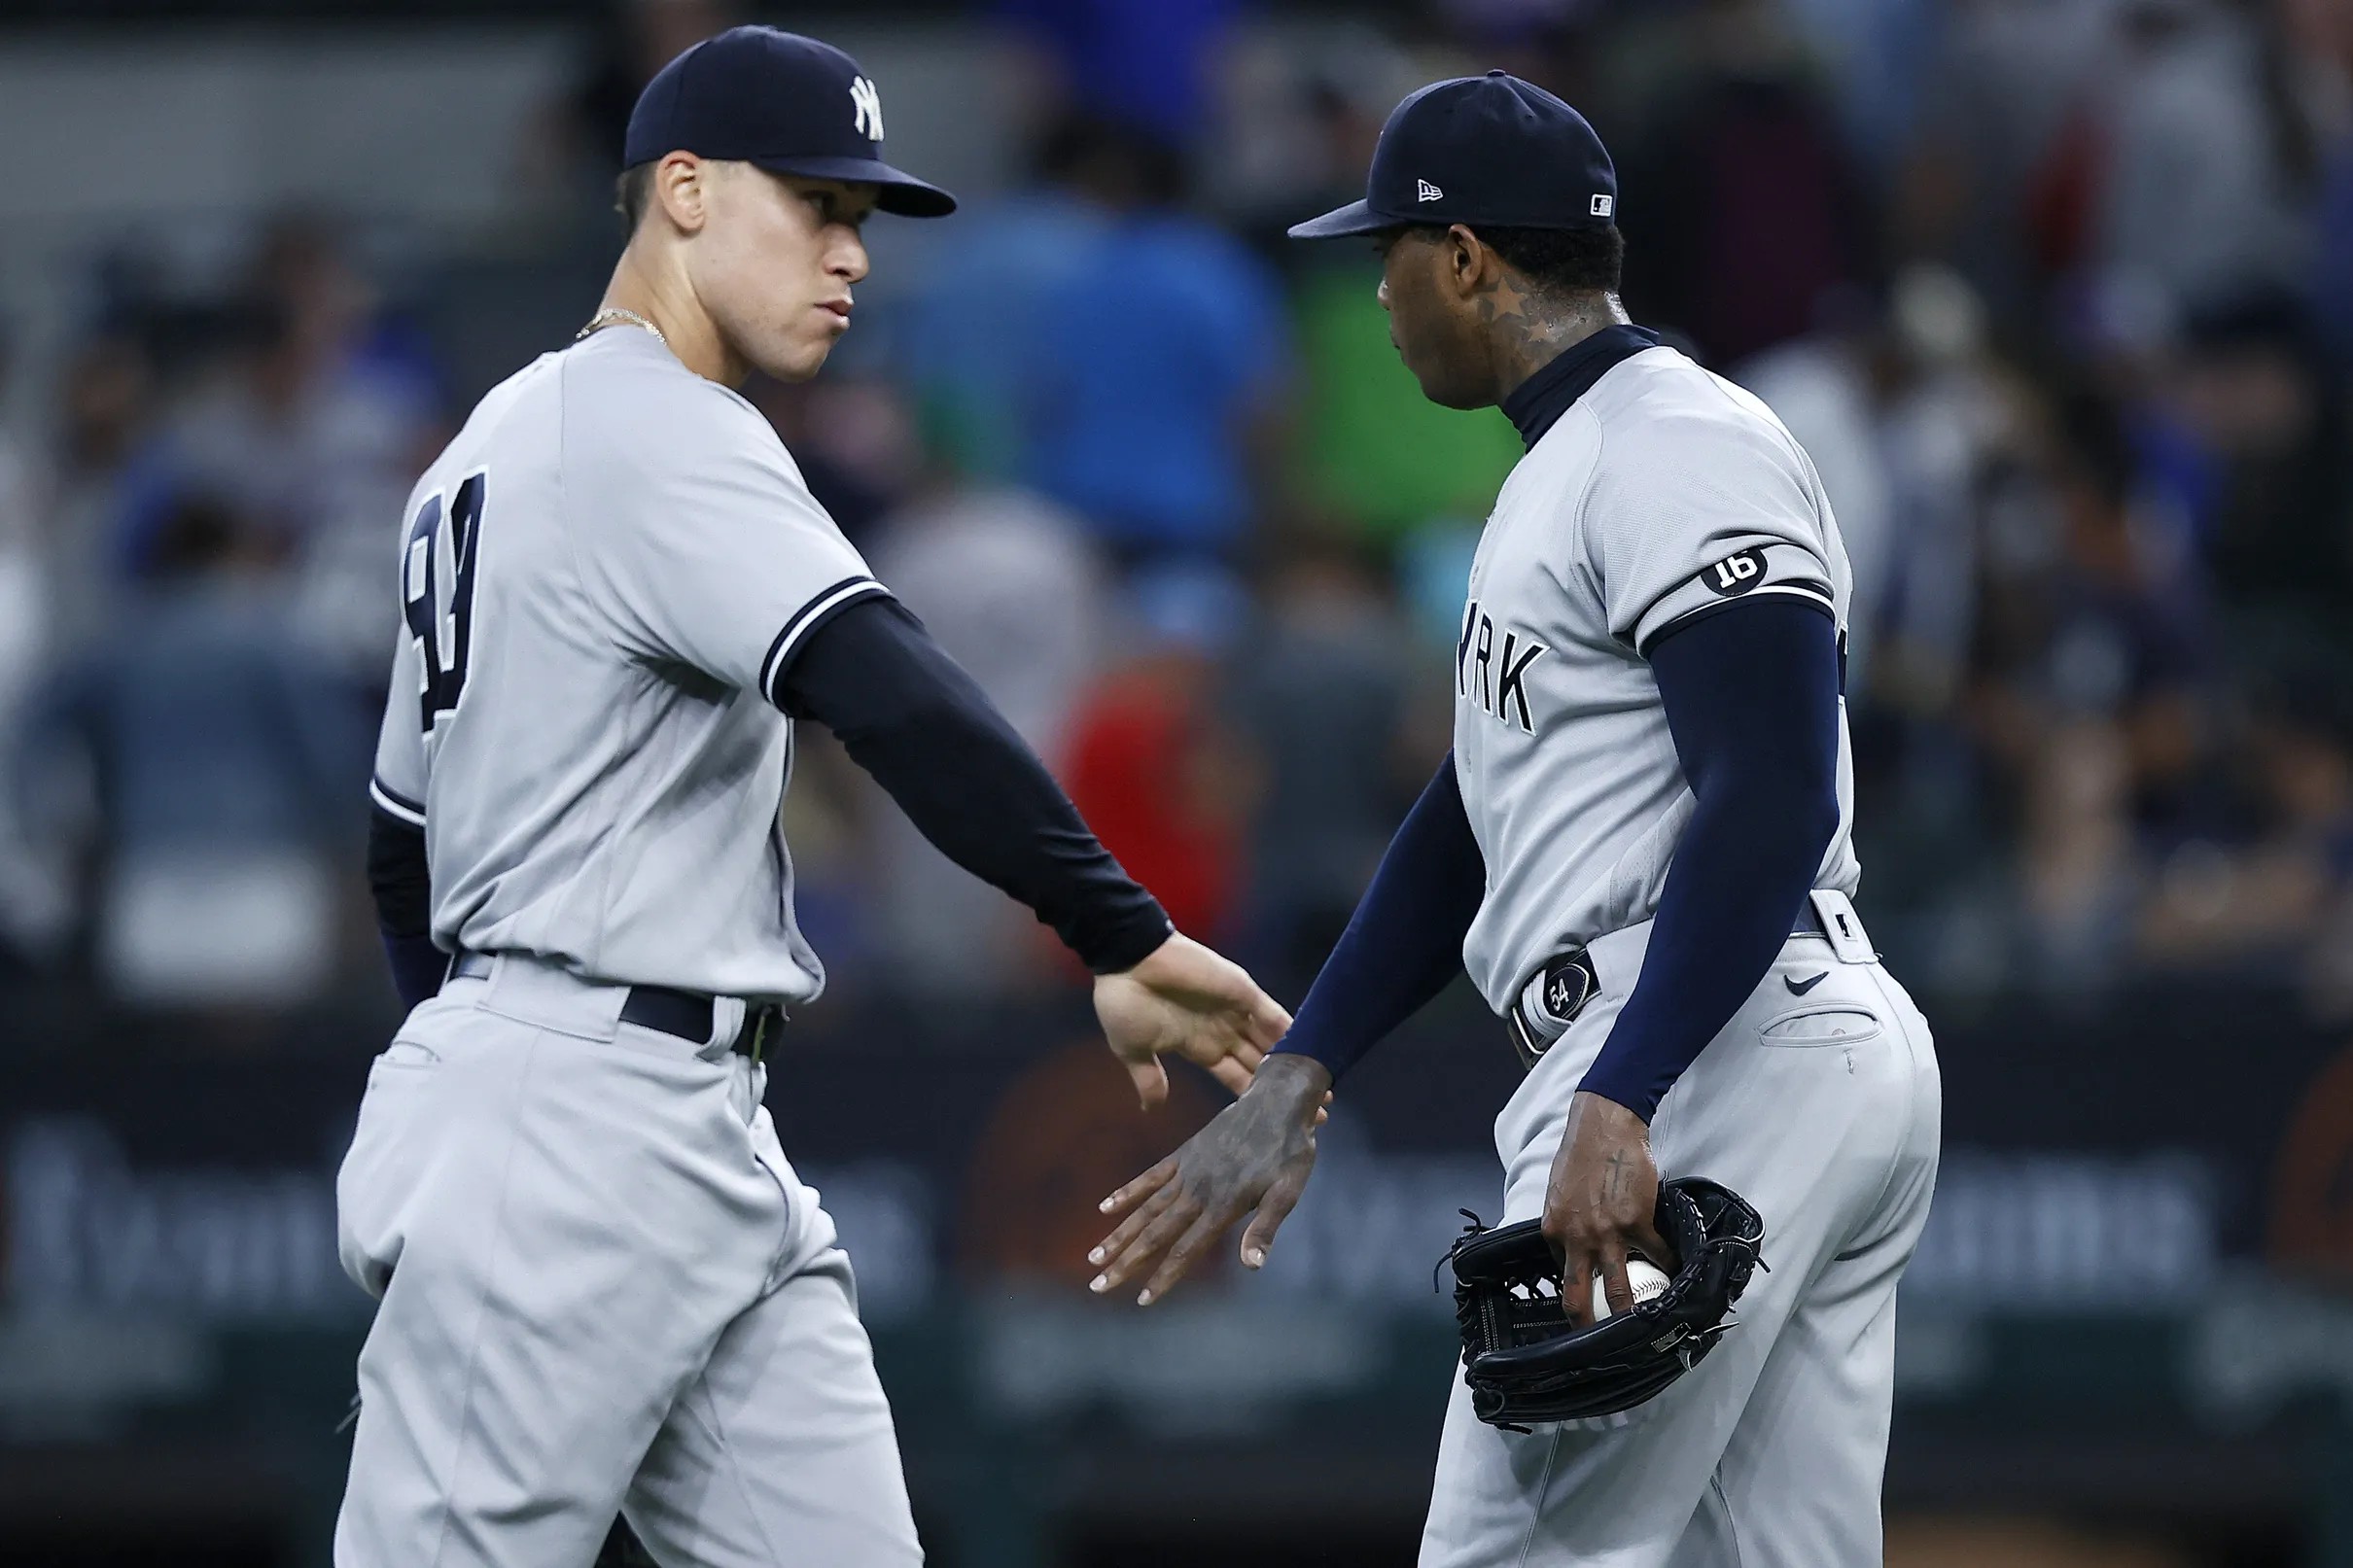 New York Yankees vs. Chicago White Sox Series Preview